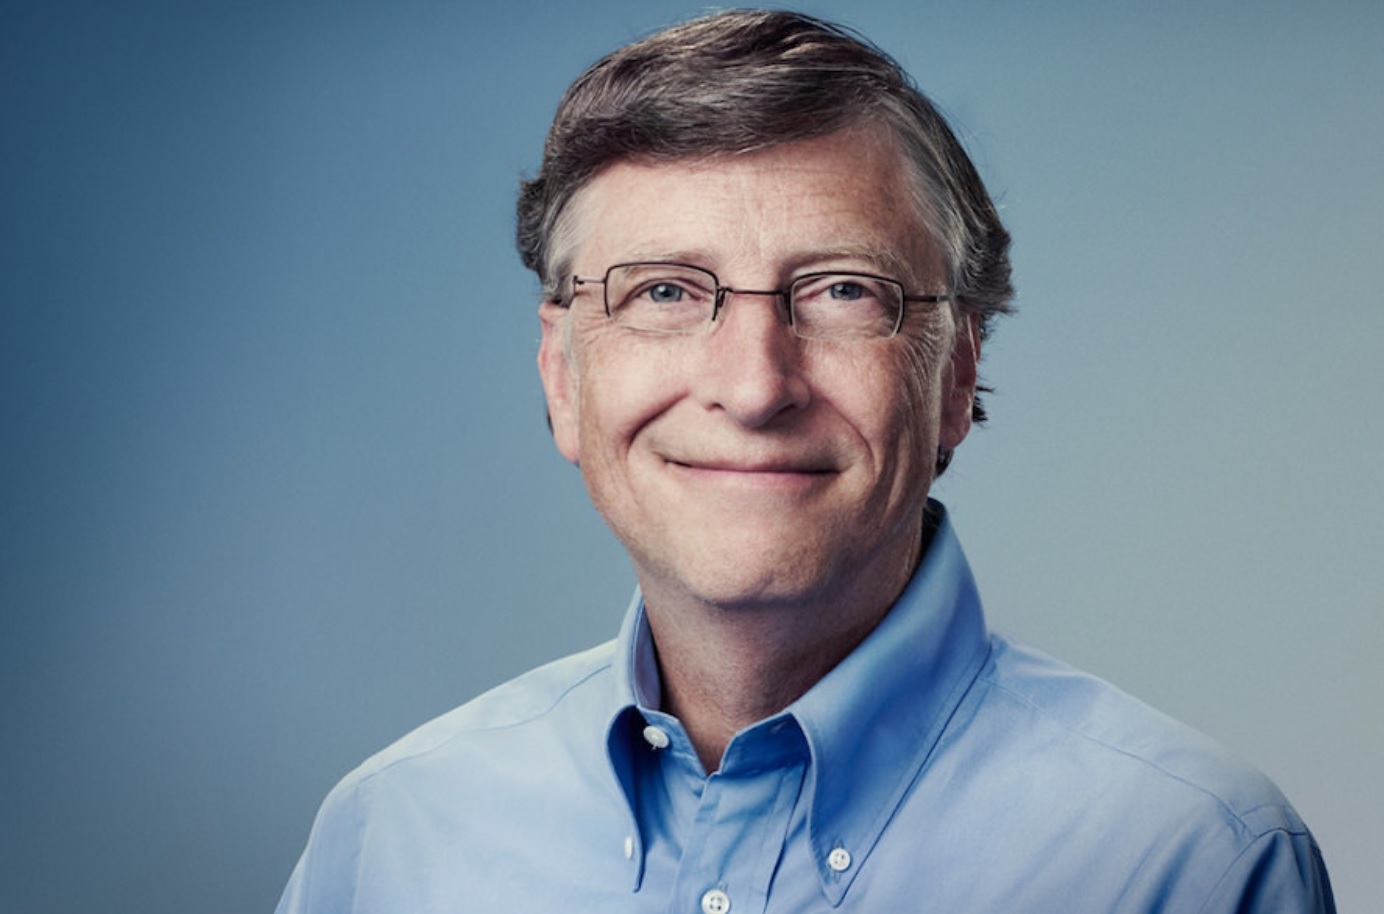 World’s first medical drone delivery project in Ghana highly extolled by Bill Gates